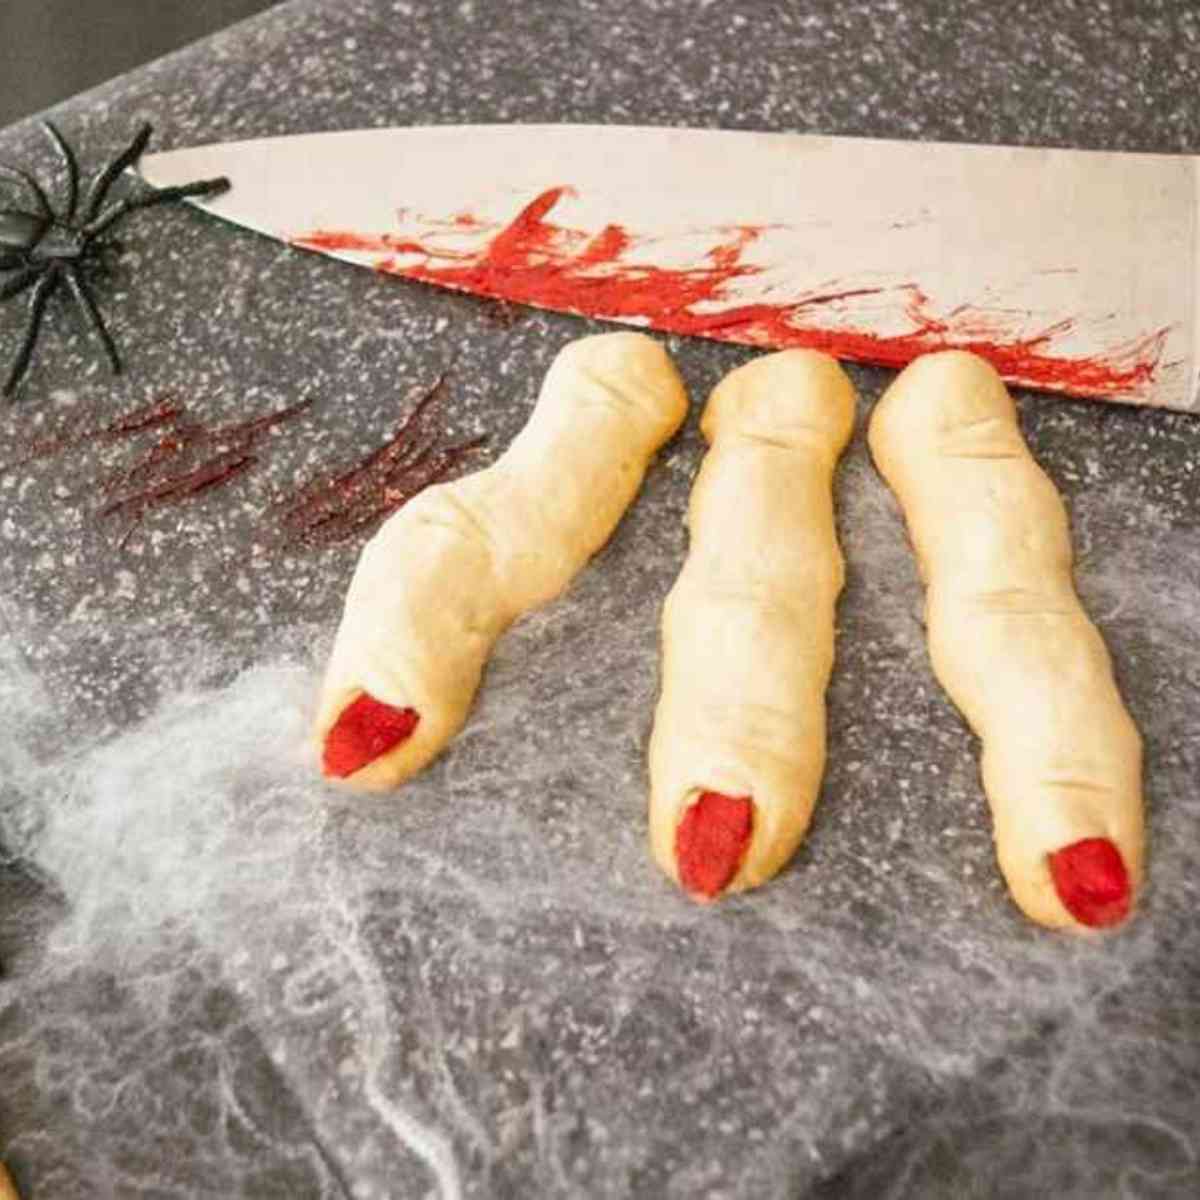 Witch Finger Cookies severed with a knife.